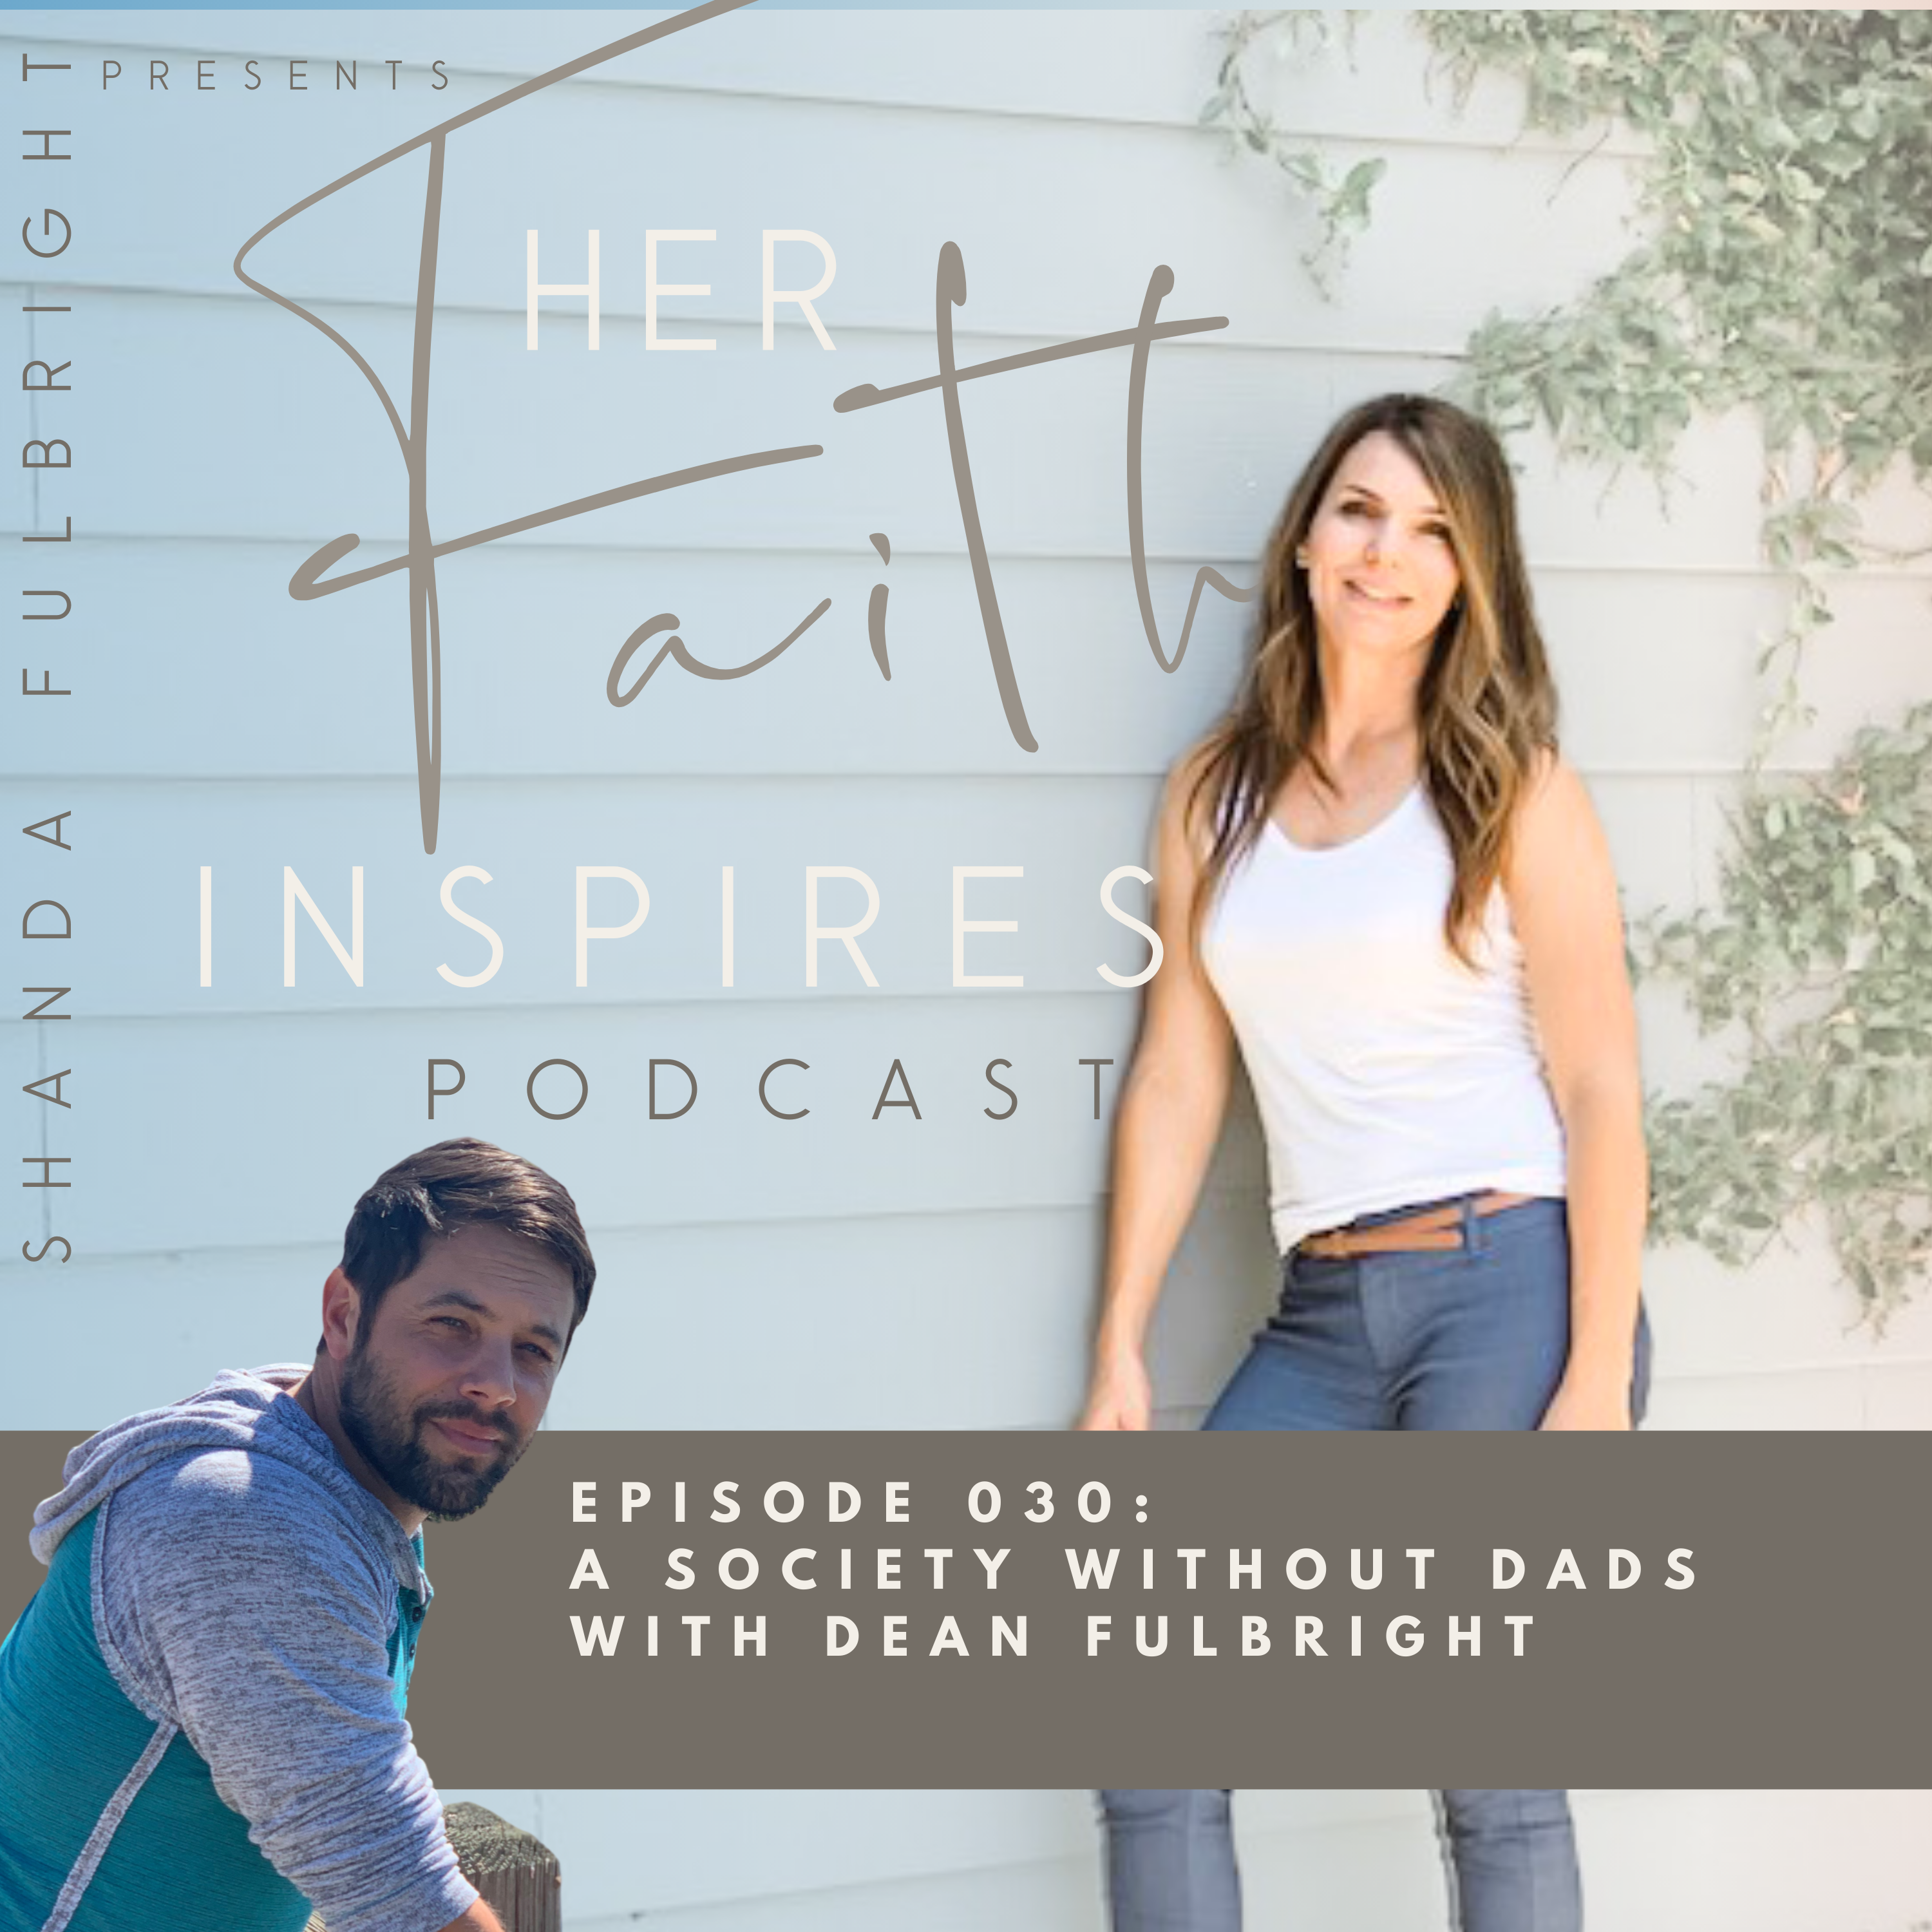 SF Podcast Episode 30 - HER FAITH INSPIRES 030: A Society Without Dads with Dean Fulbright